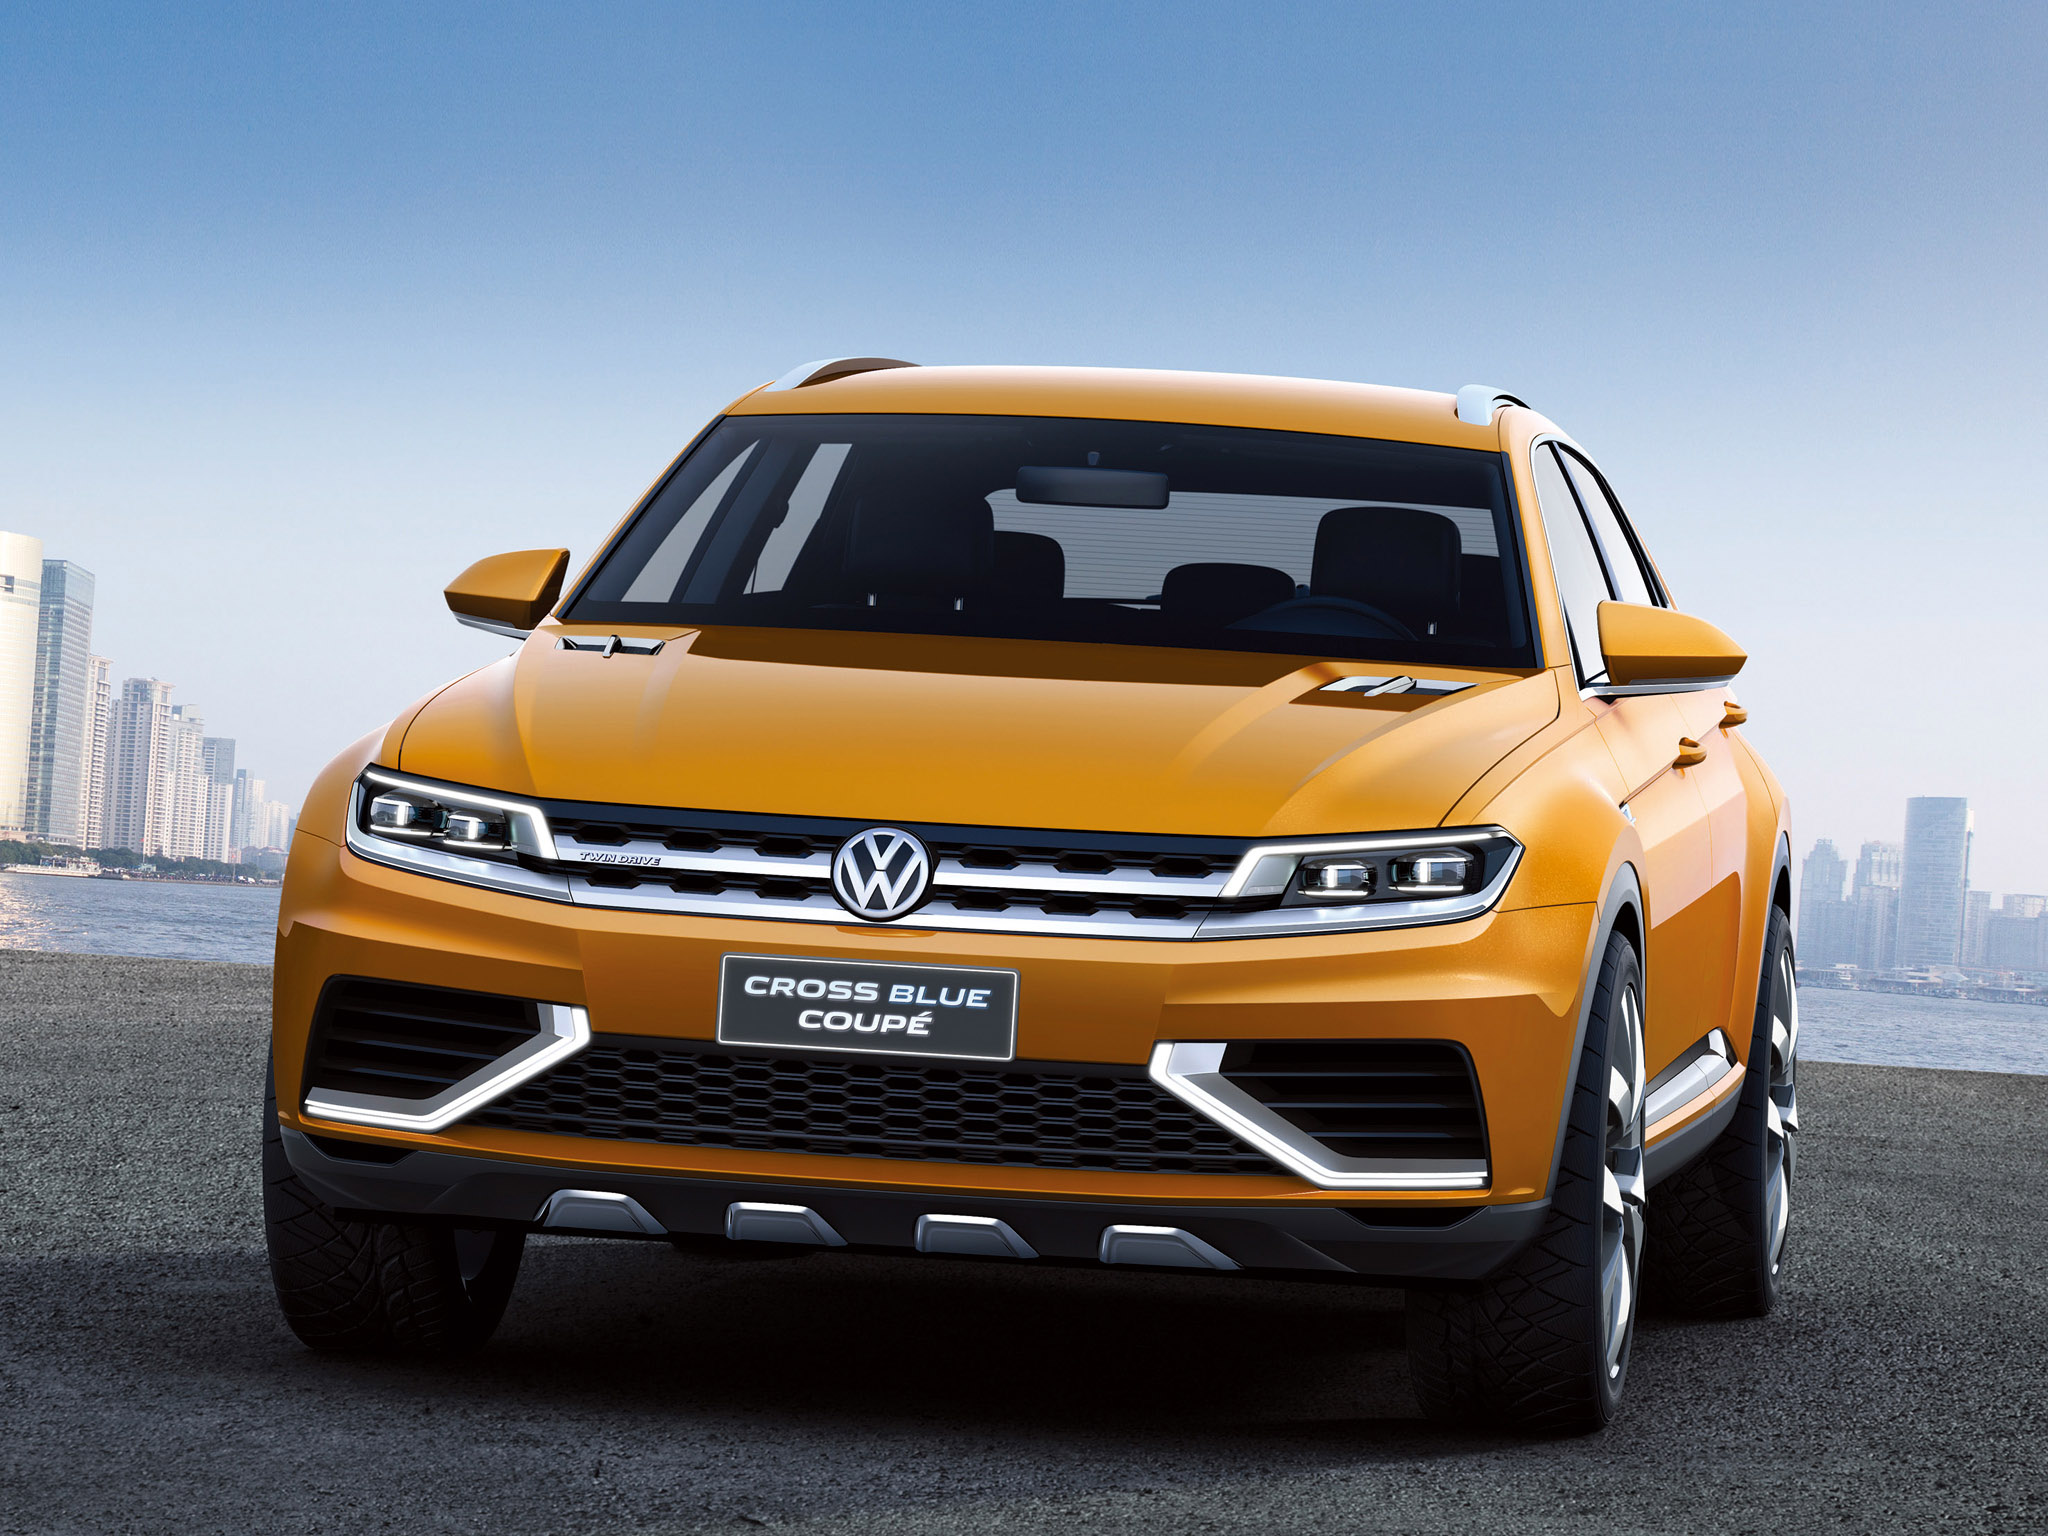 Volkswagen CrossBlue Coupe Concept photo #1